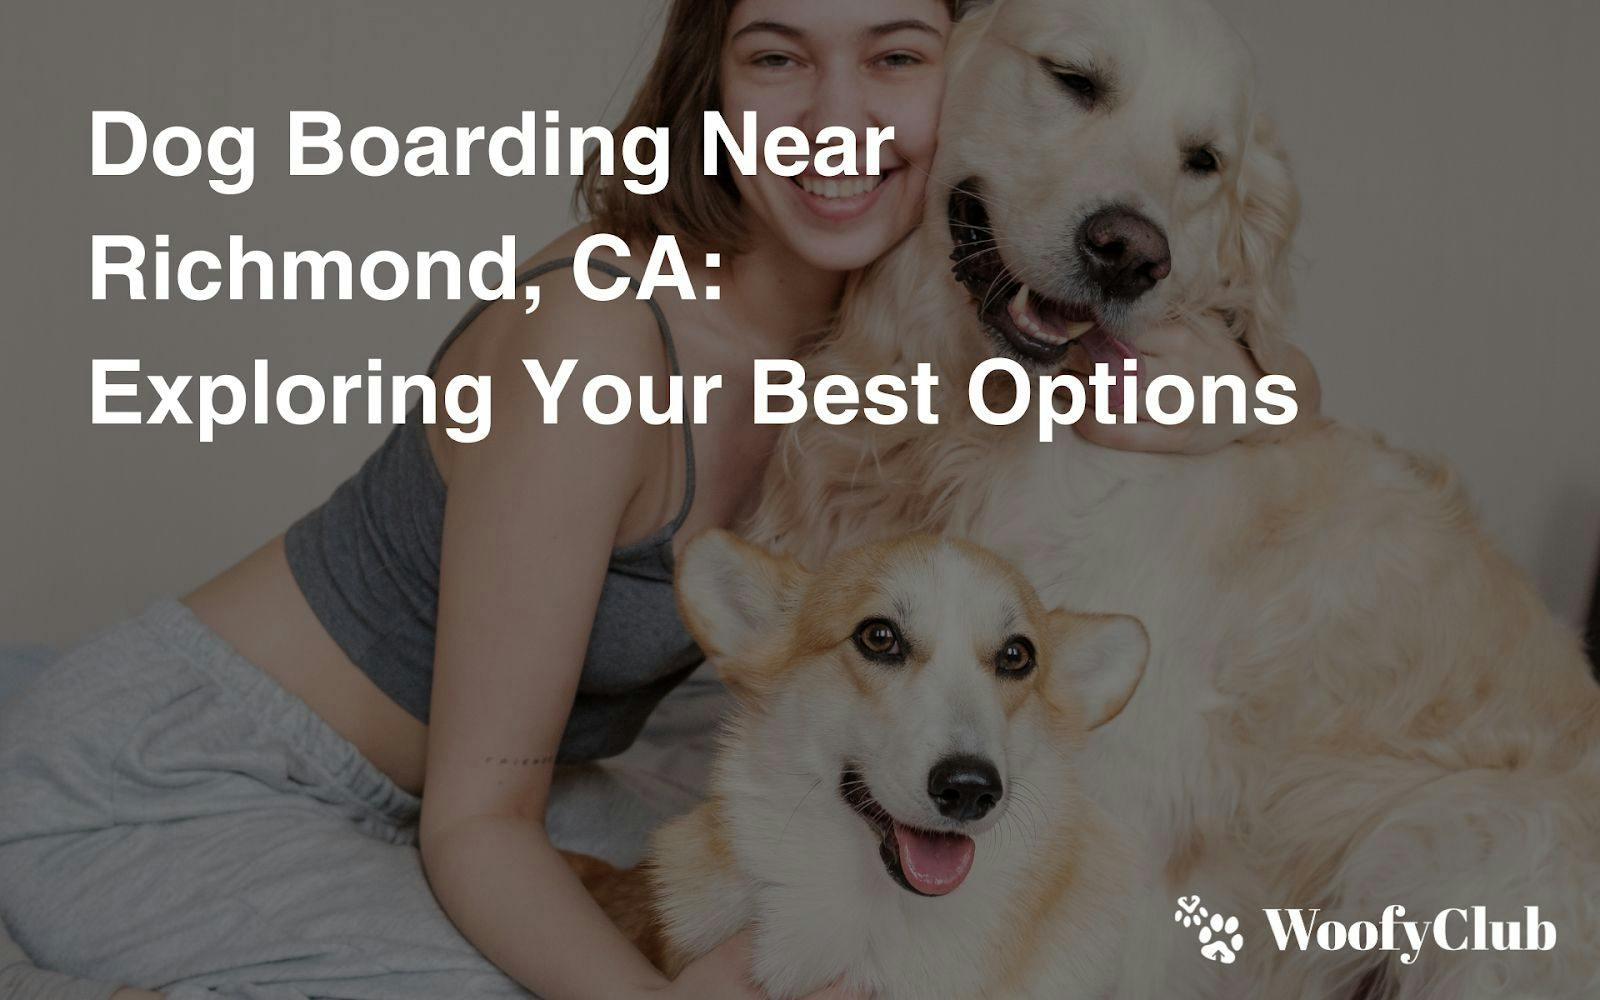 Dog Boarding Near Richmond, CA: Exploring Your Best Options